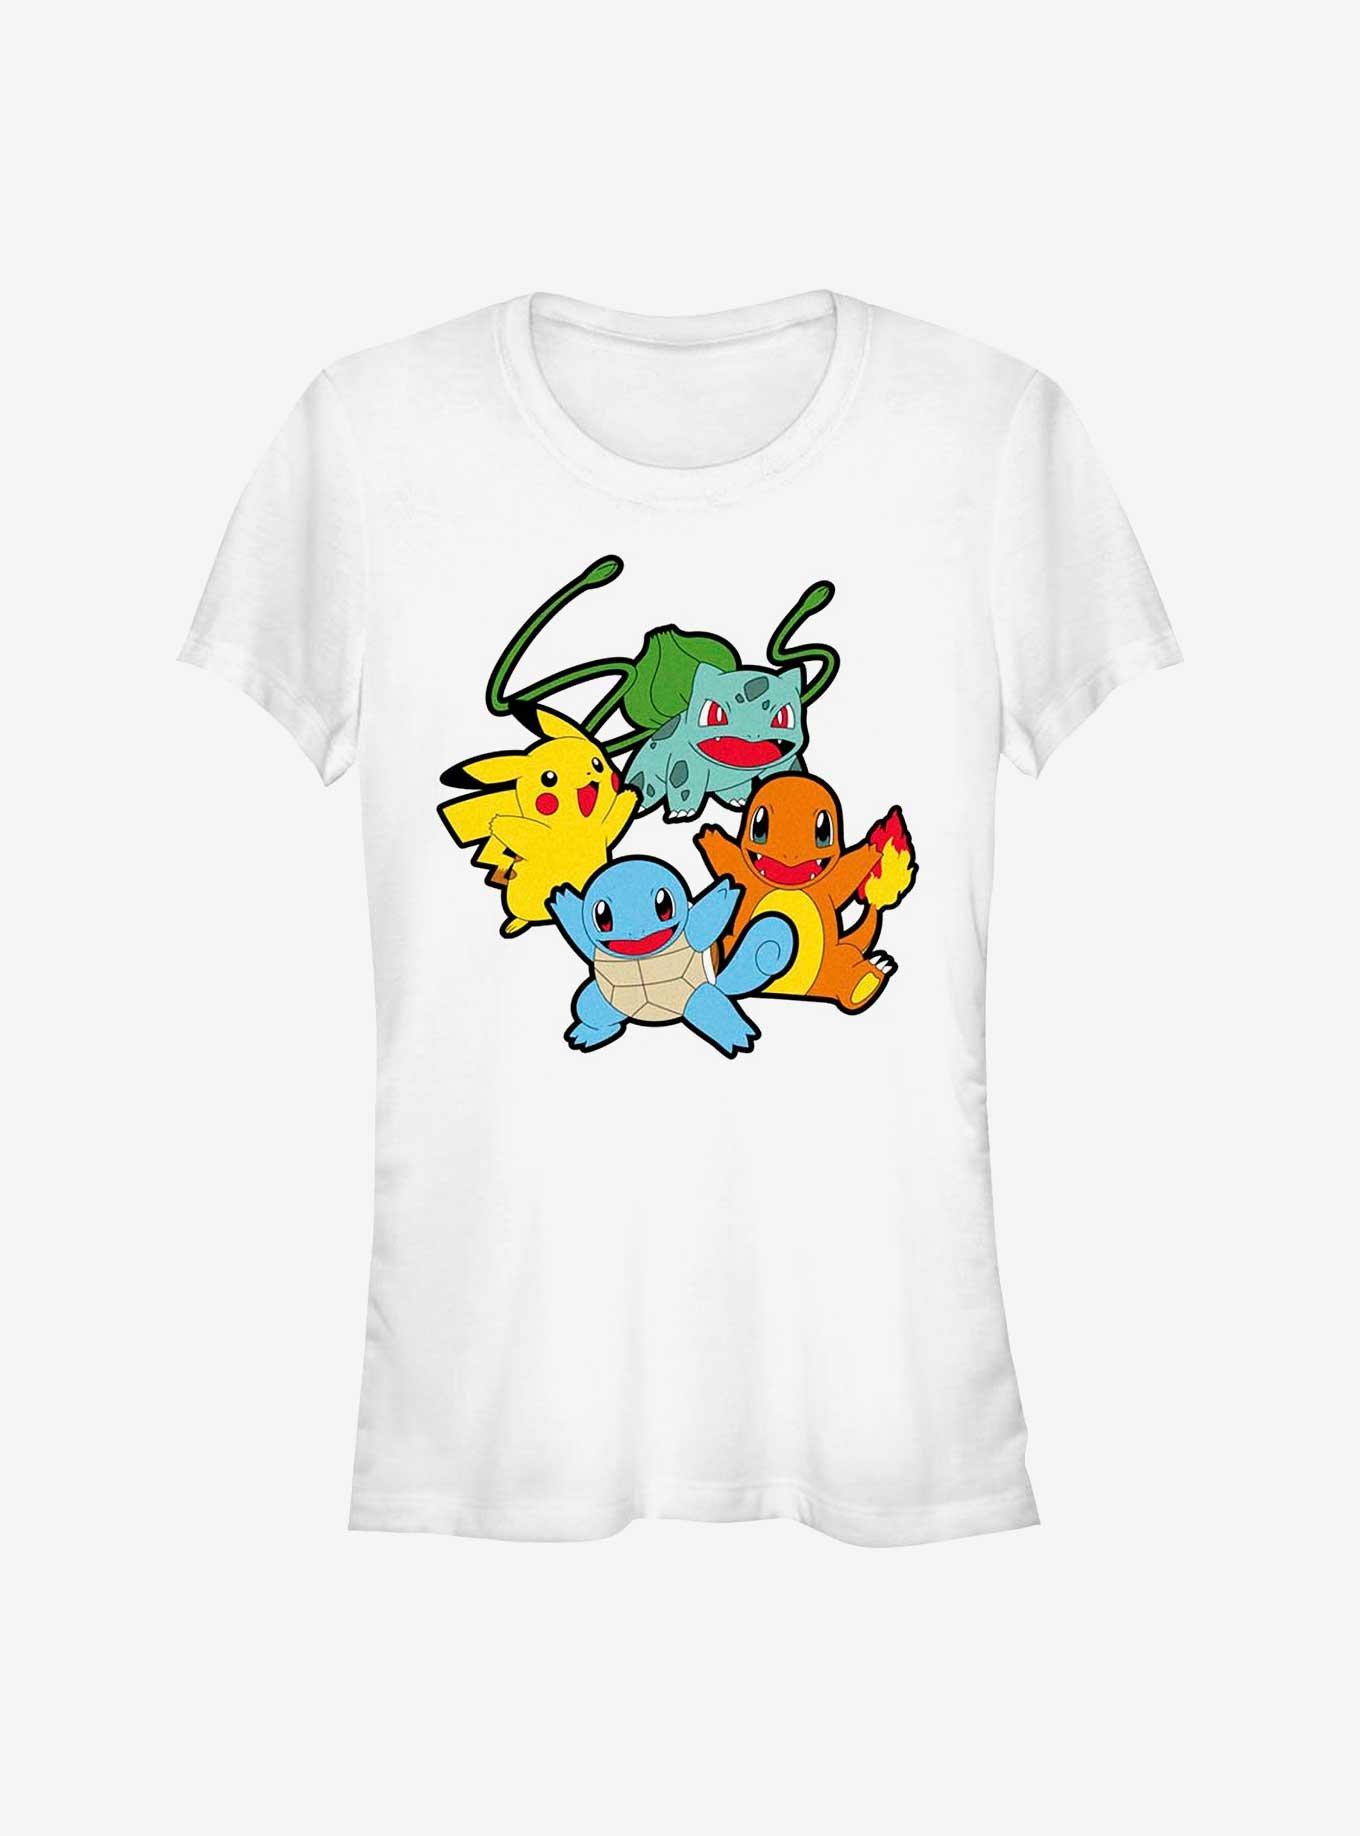 Kompliment Udrydde Faciliteter Pokemon Classic Group Bulbasaur, Pikachu, Charmander, and Squirtle Girls T- Shirt - WHITE | Hot Topic